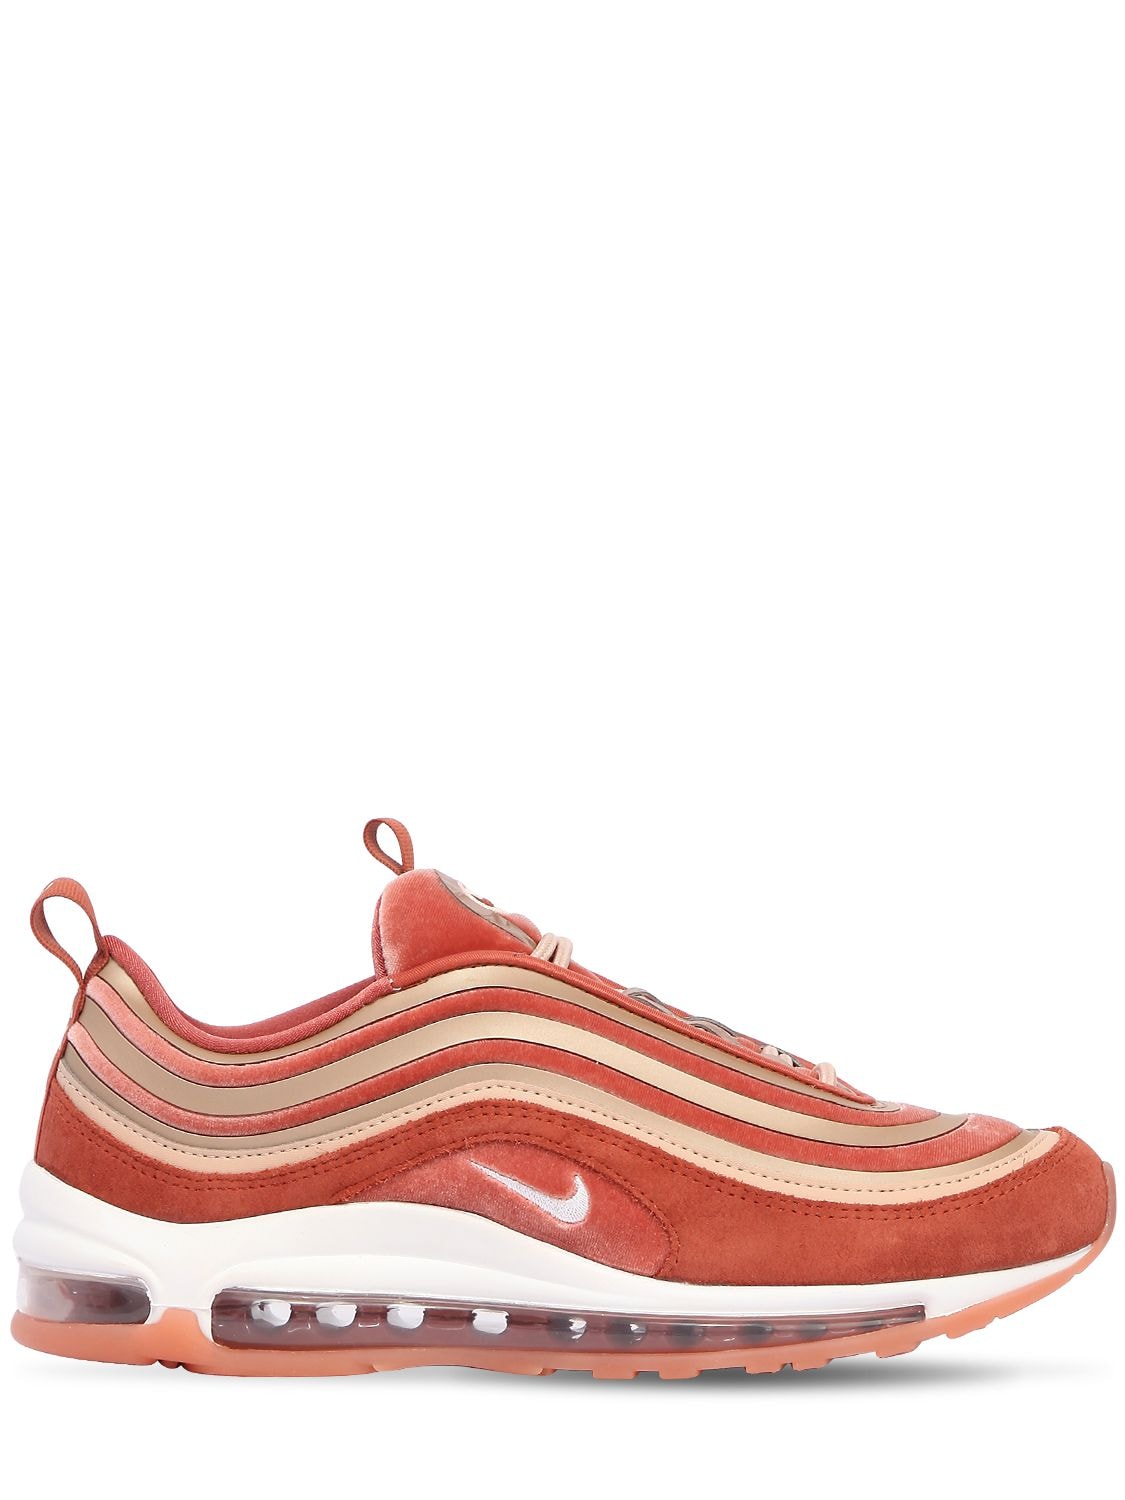 Buy Air Max 97 Ultra Lux Sneakers for 